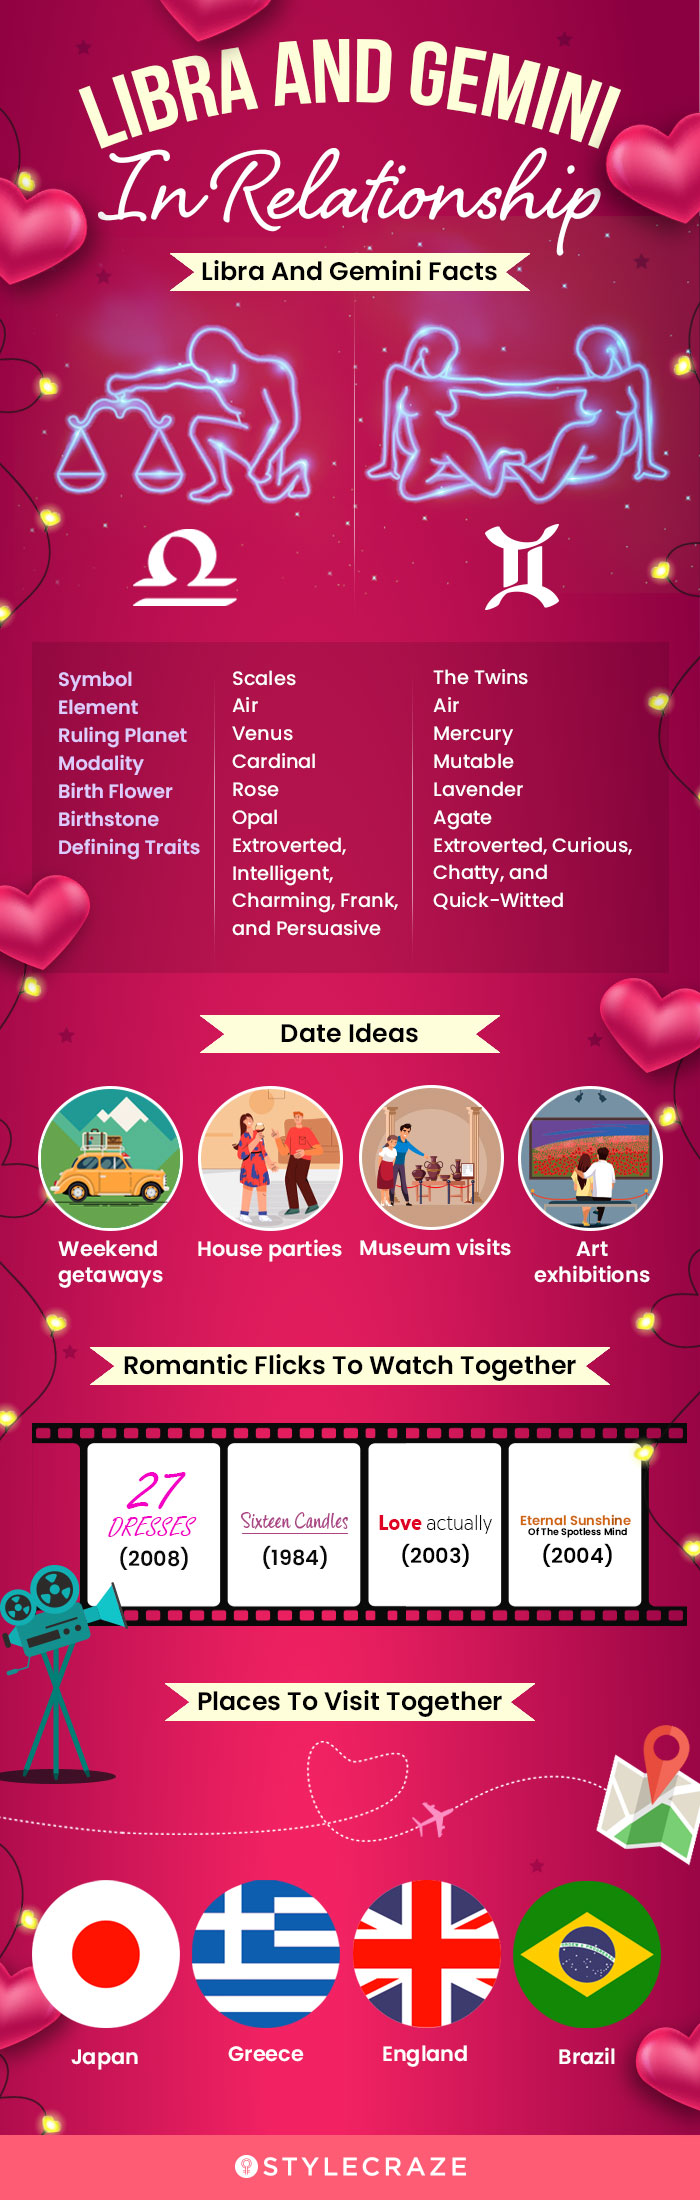 libra and gemini in relationship [infographic]